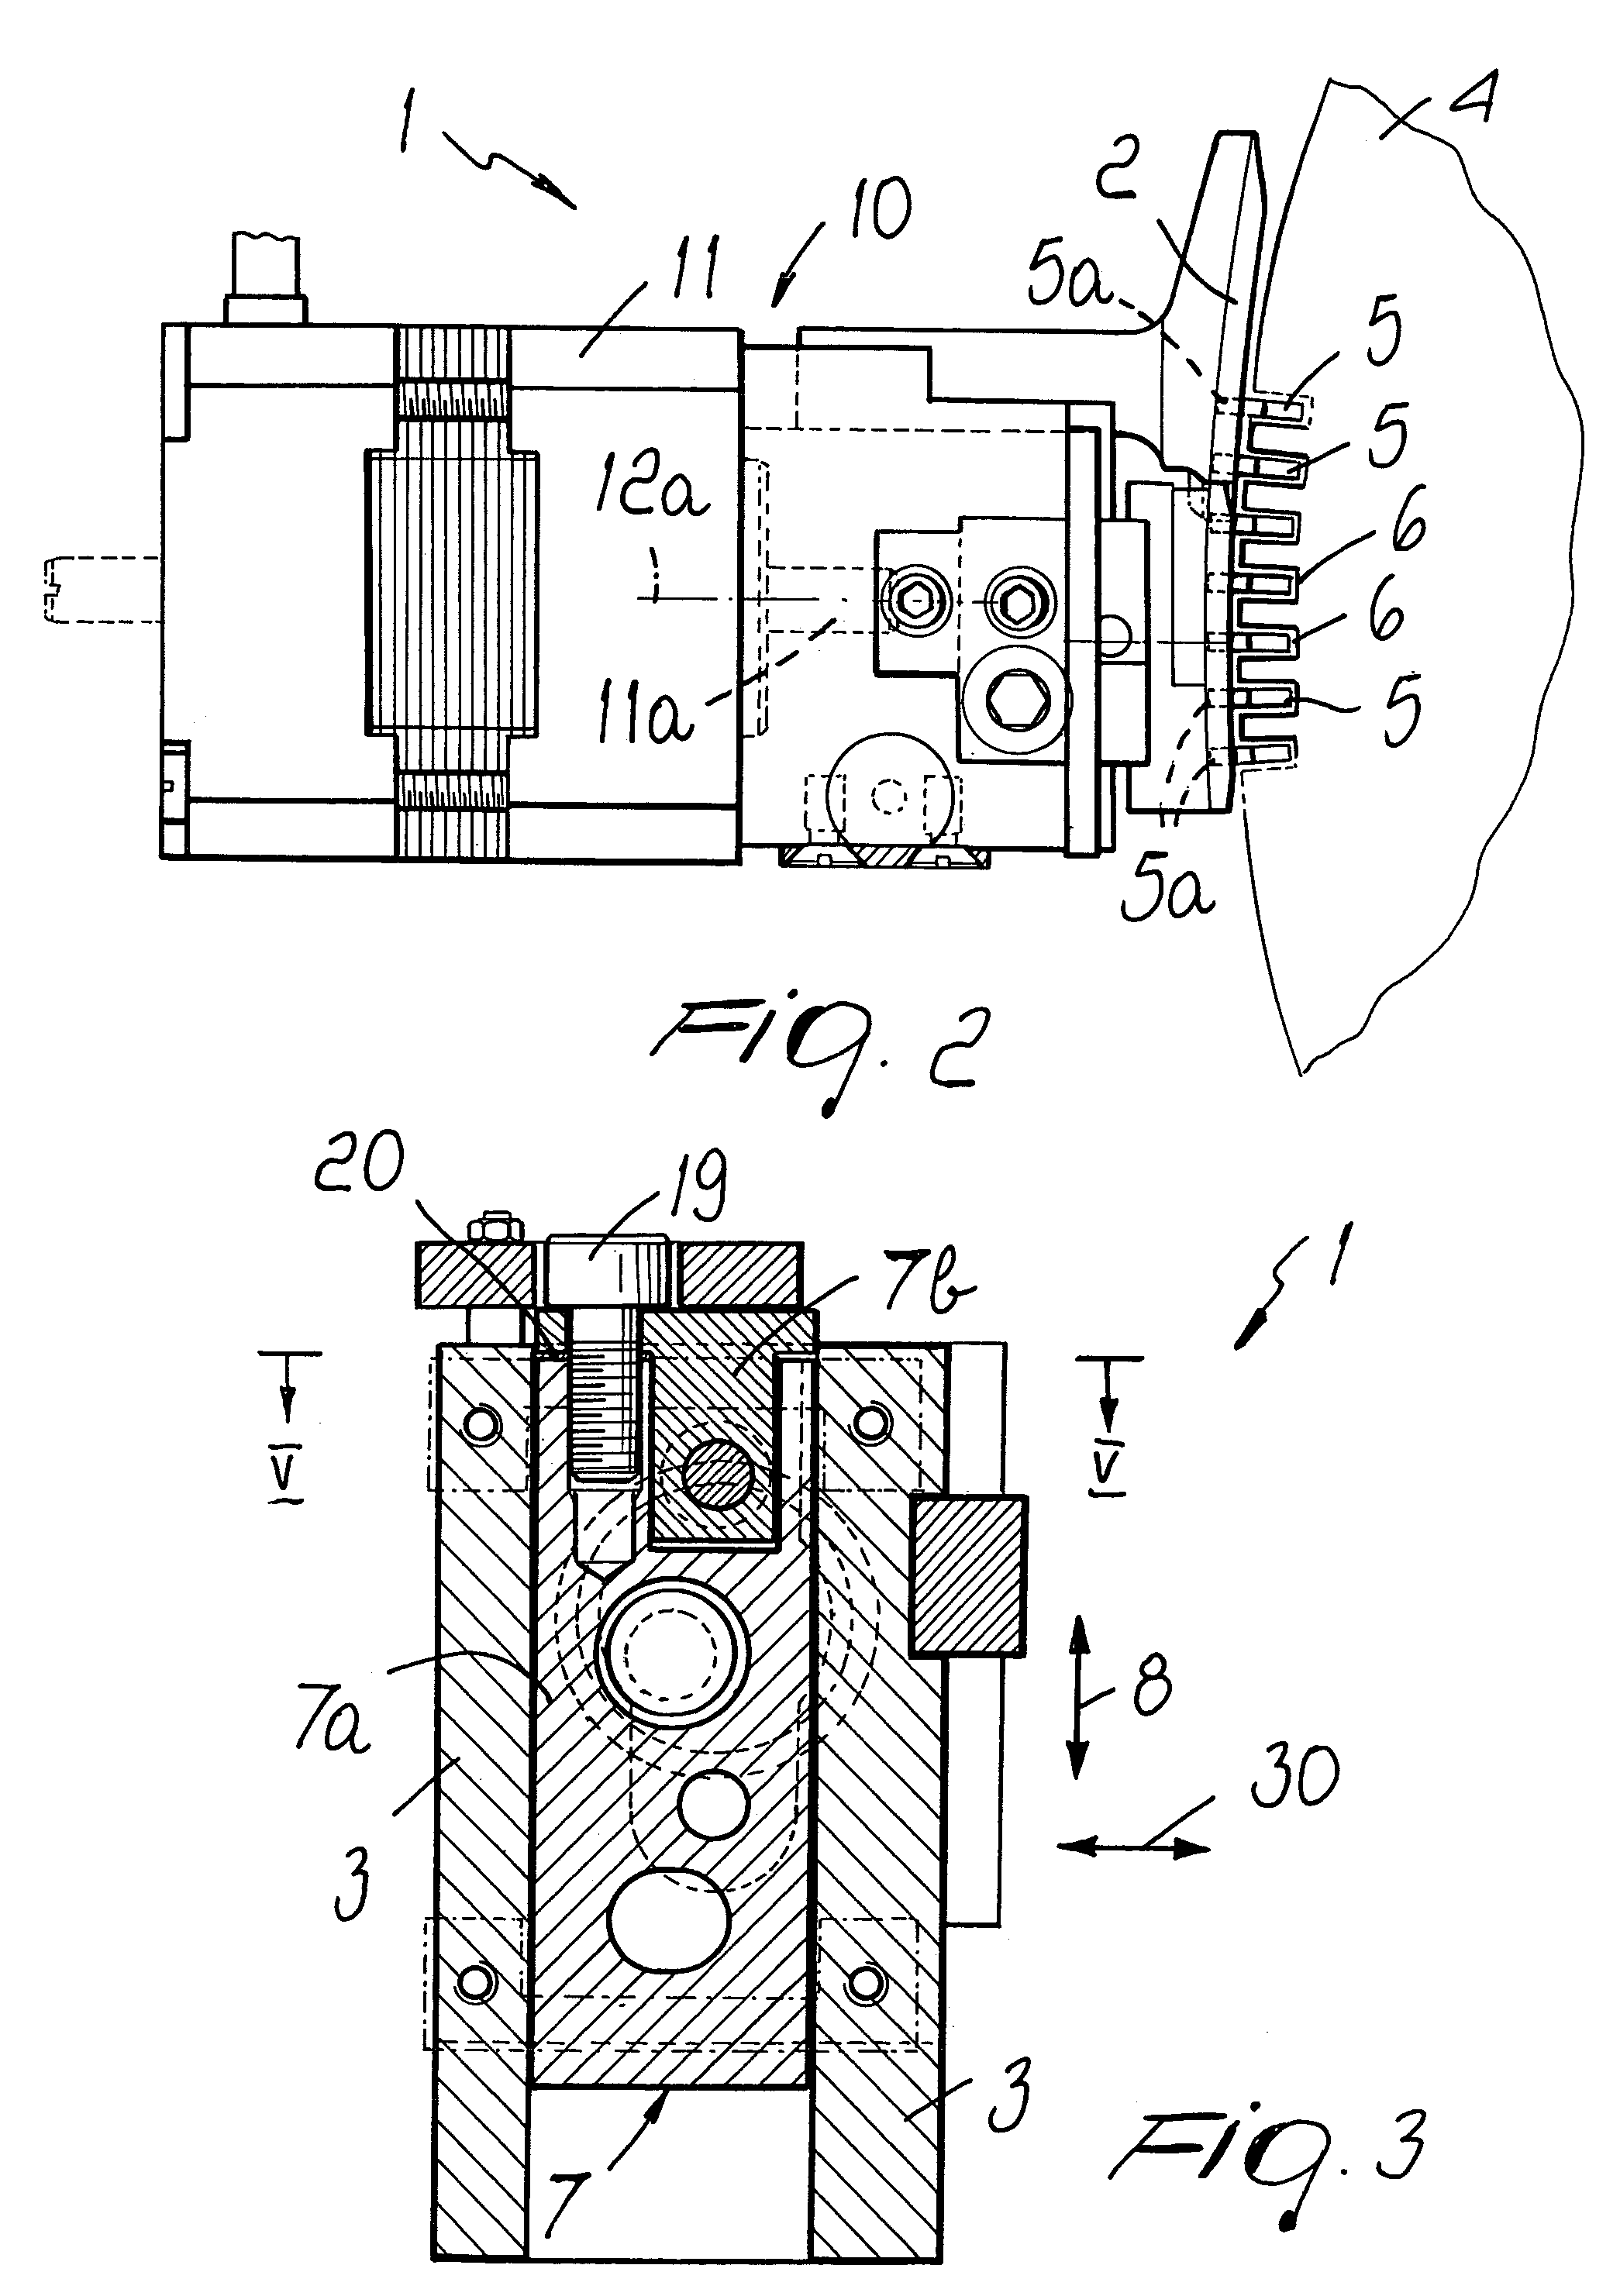 Device for varying stitch tightness for knitting machine for hosiery or the like, particularly for circular knitting machines